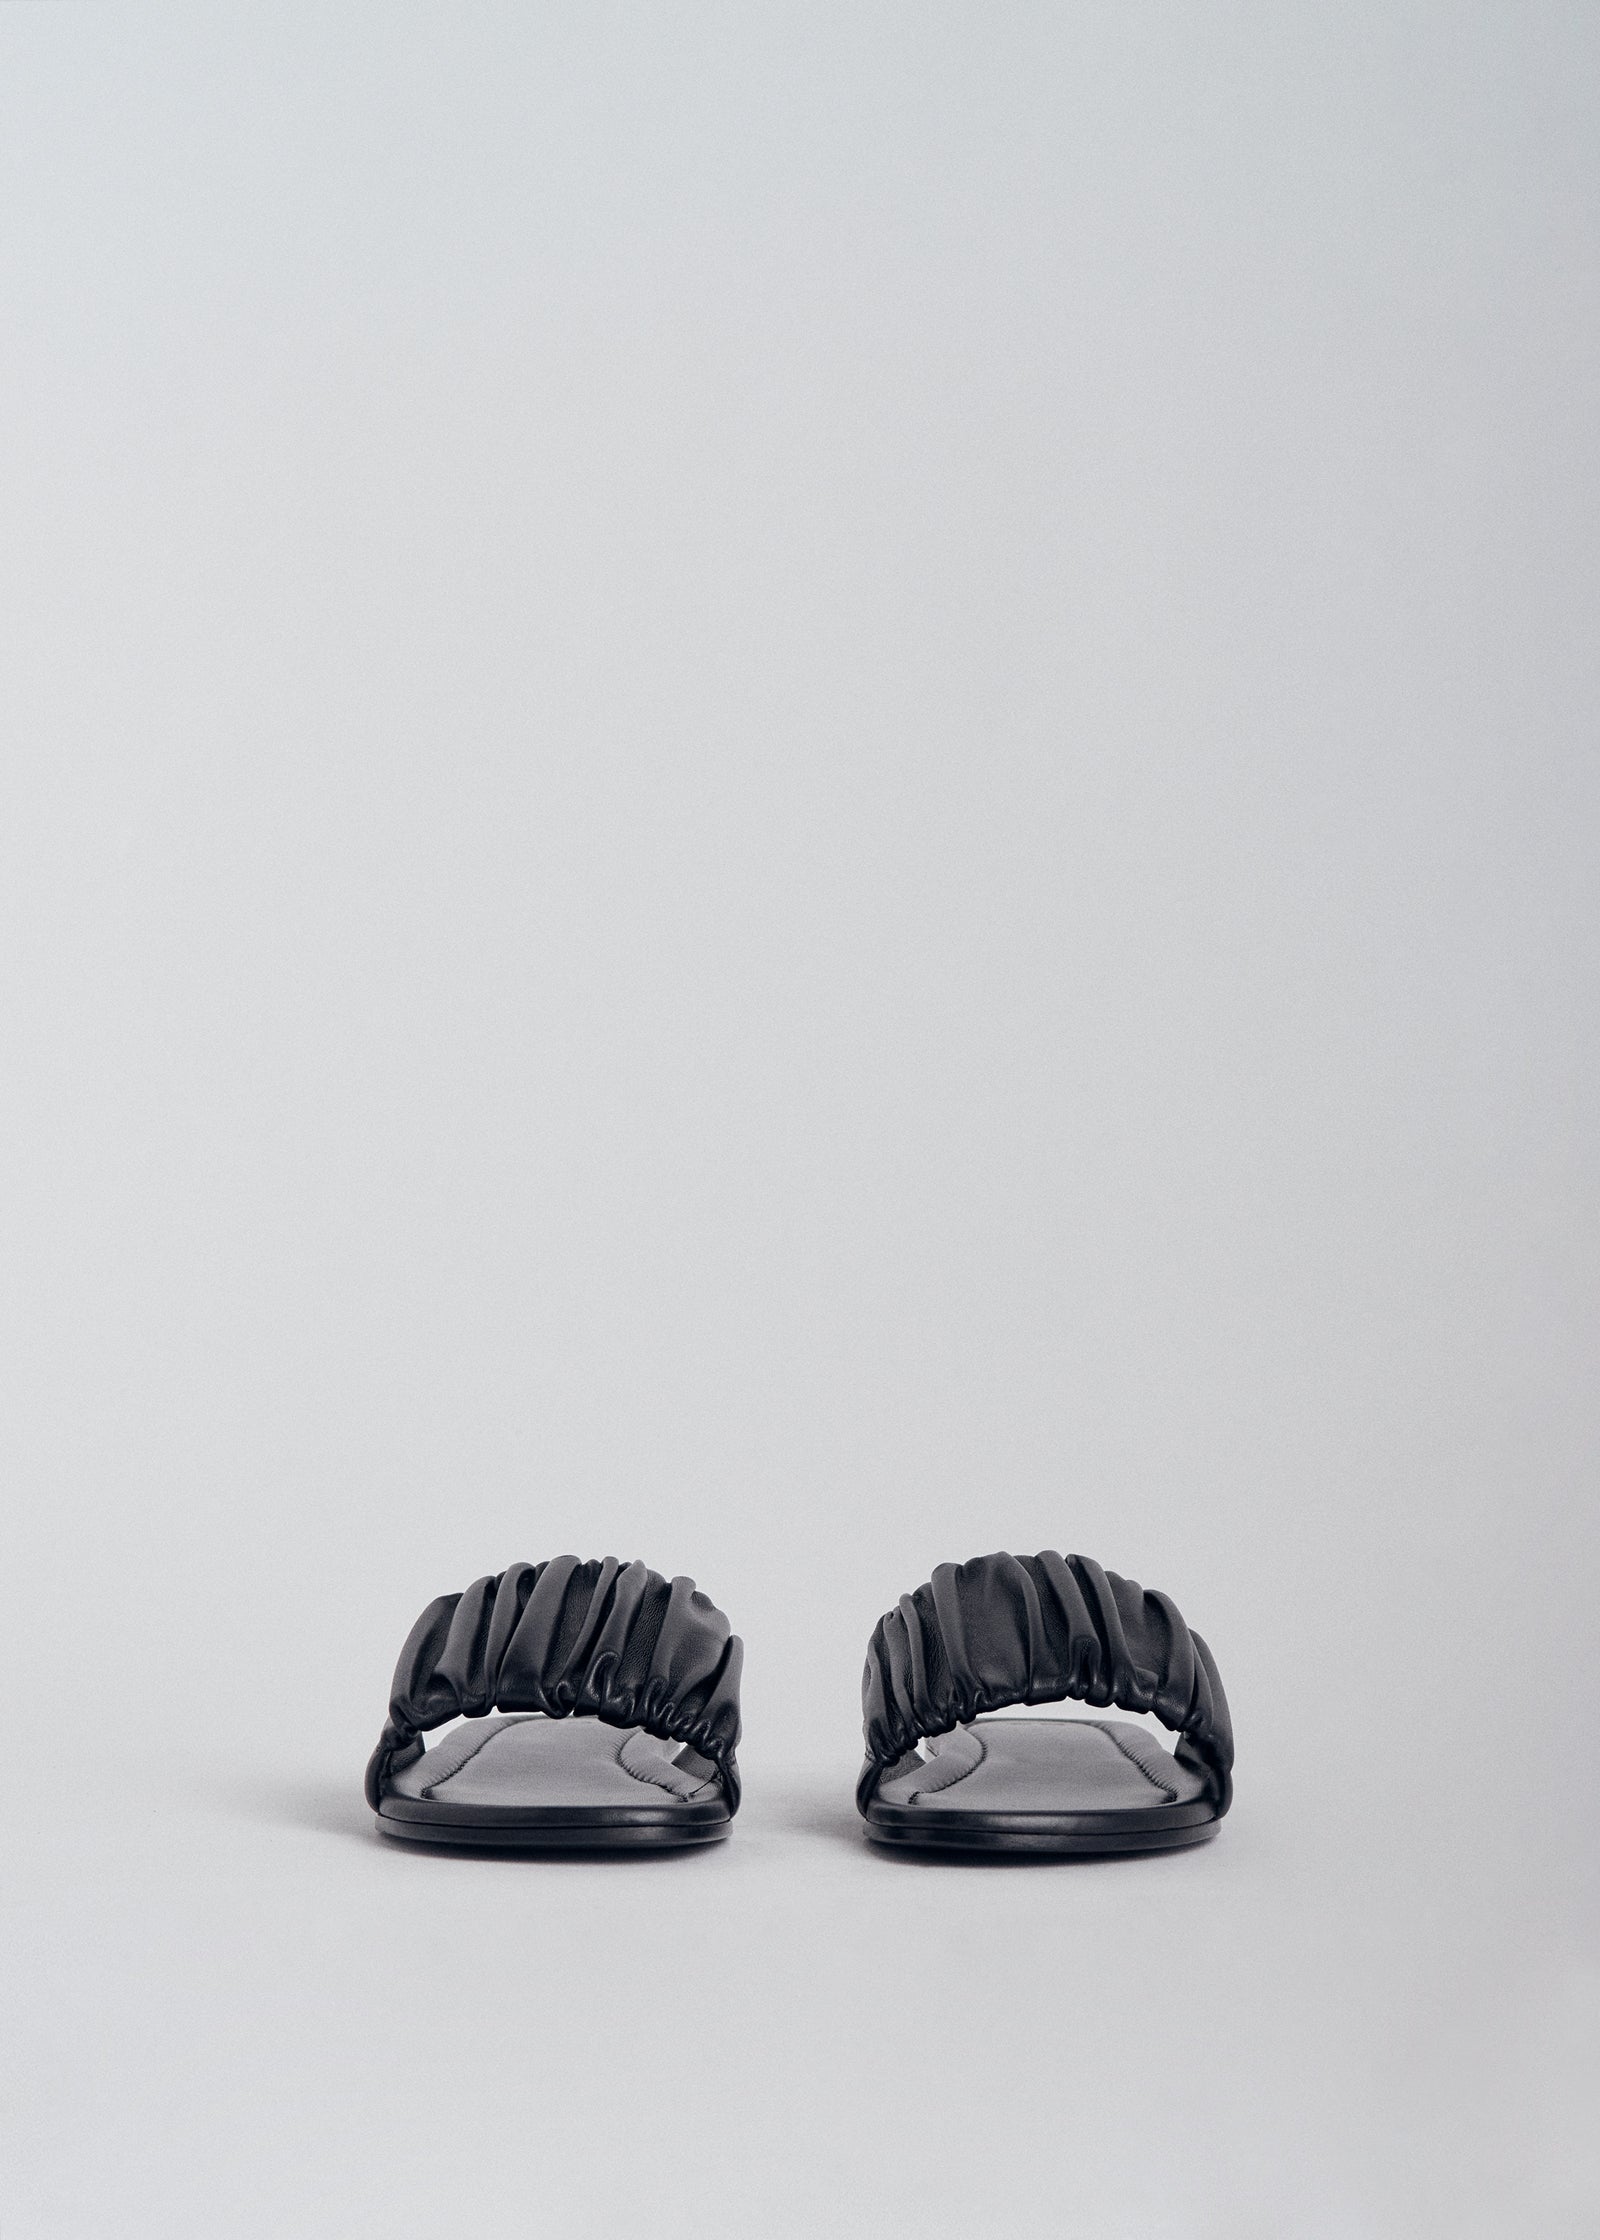 Ruched Slide Sandal in Leather - Black - CO Collections